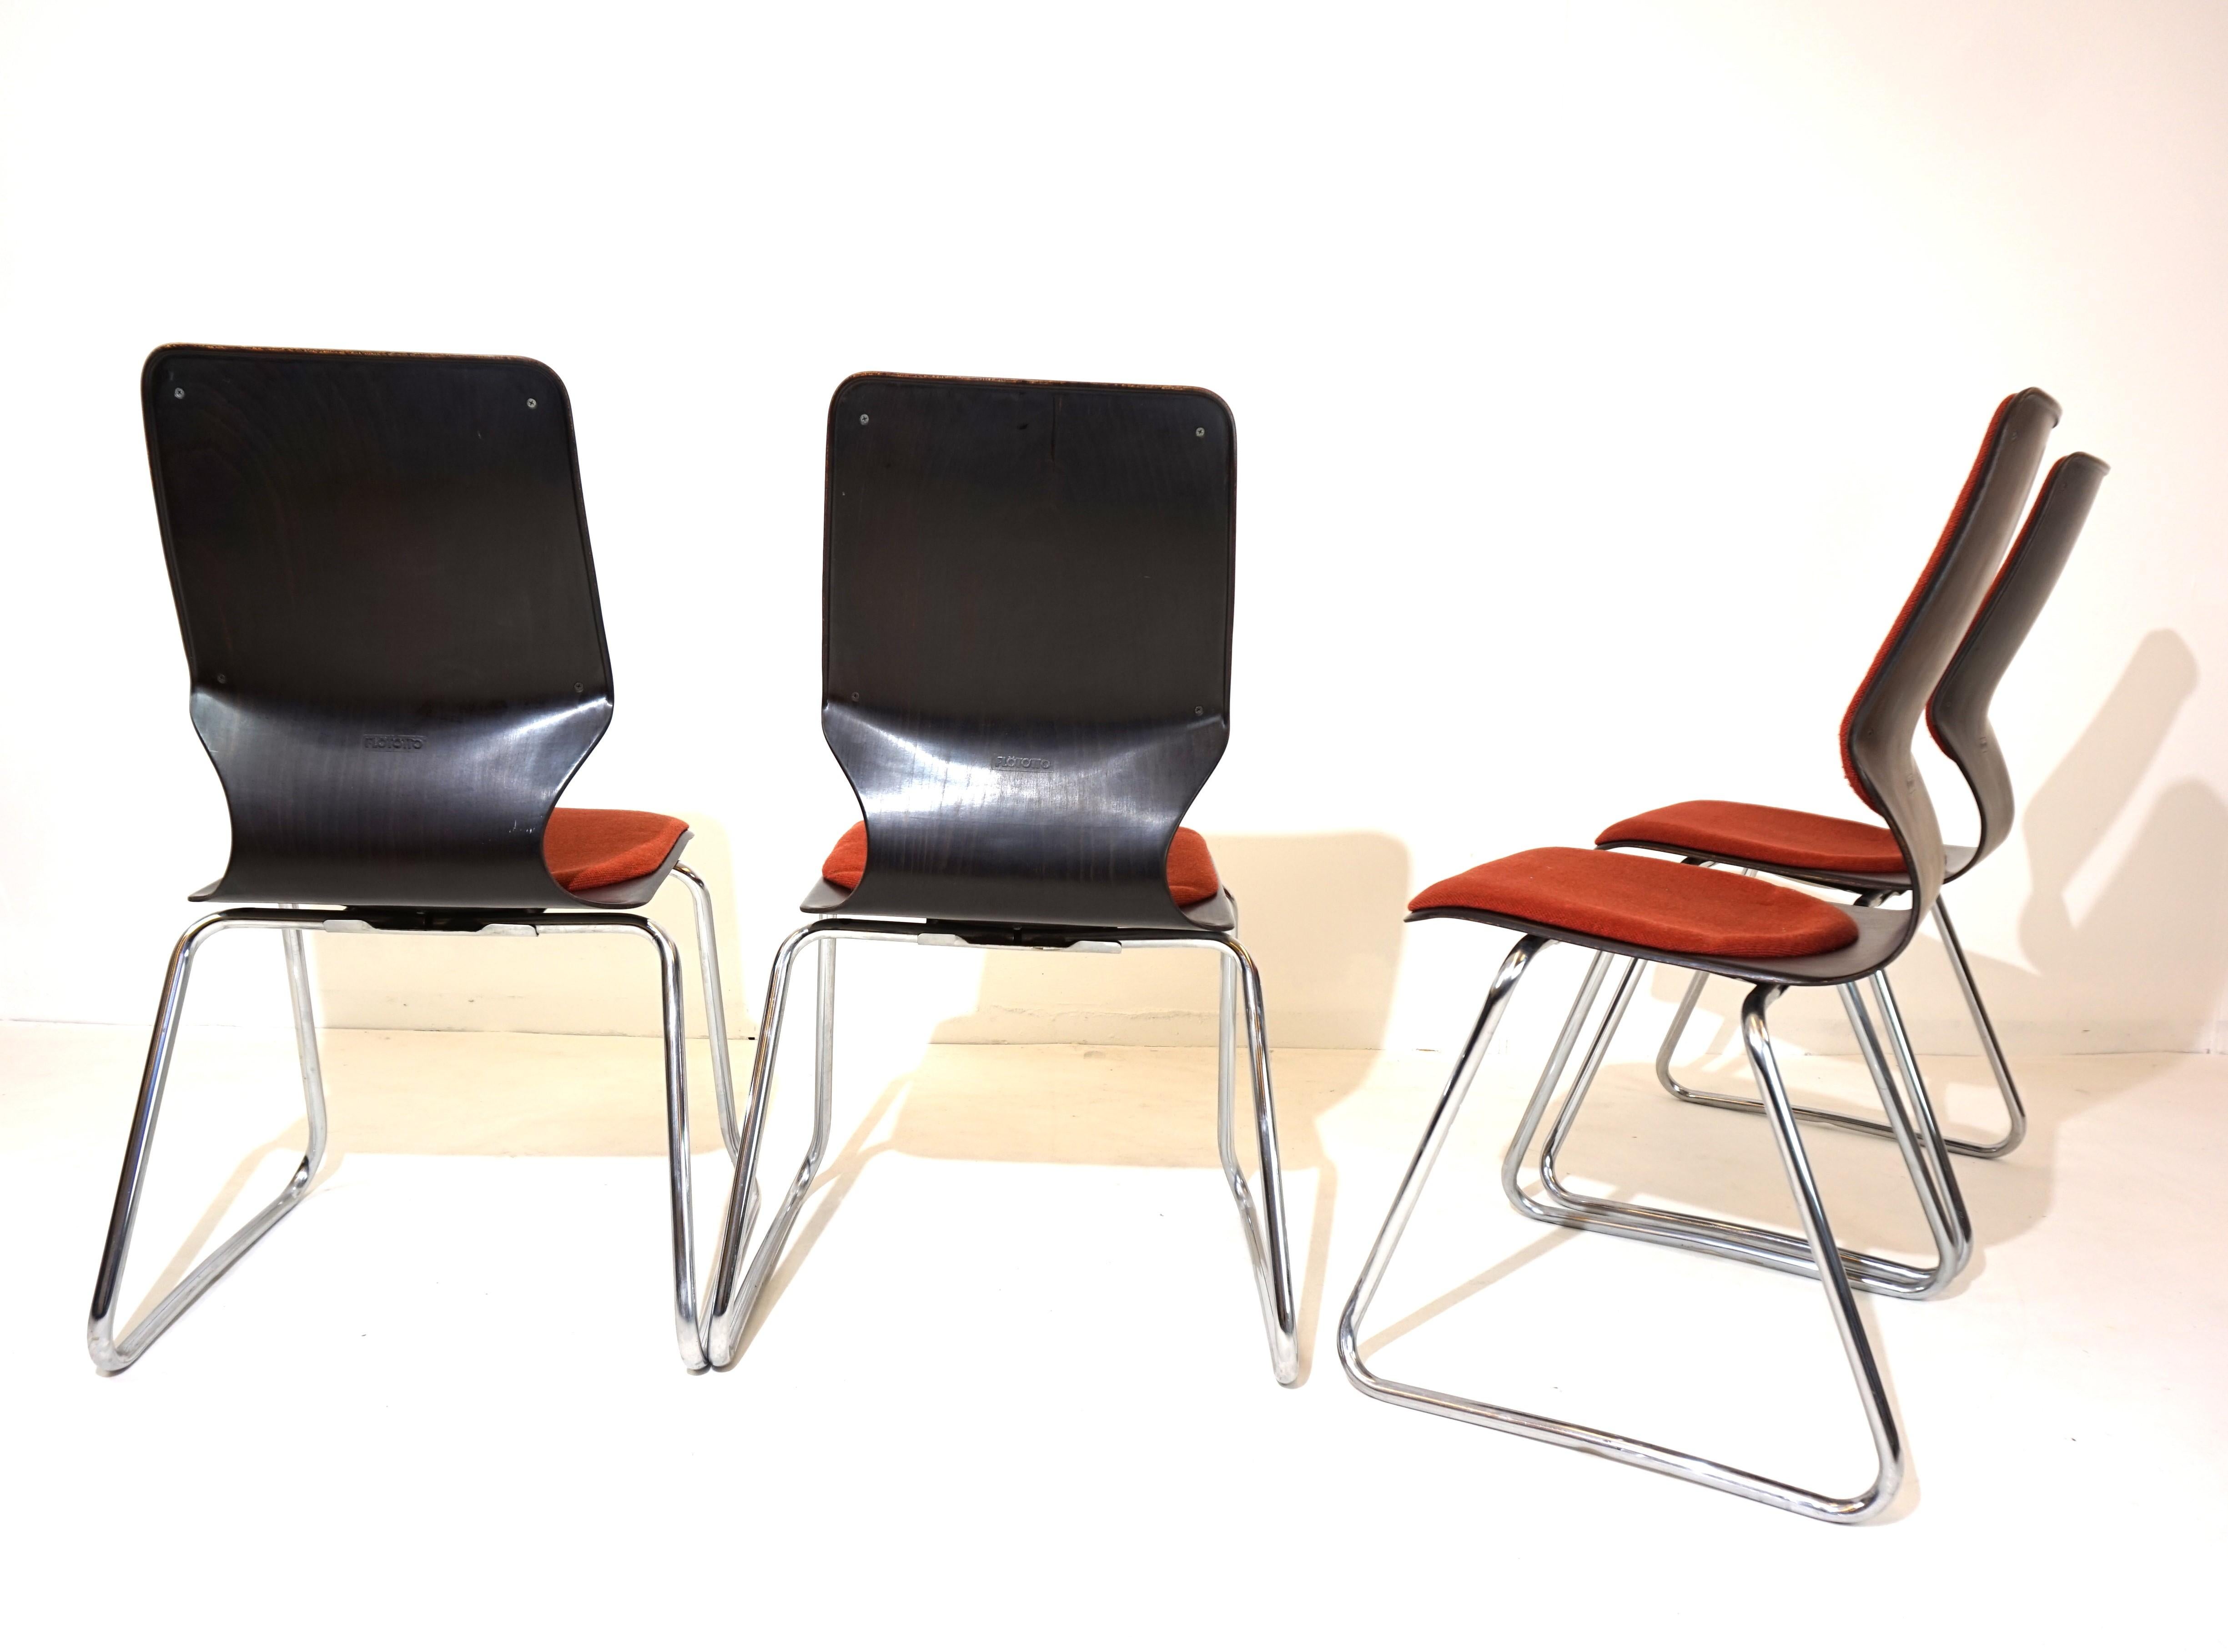 Flötotto set of 4 Pagholz chairs by Elmar Flötotto For Sale 8